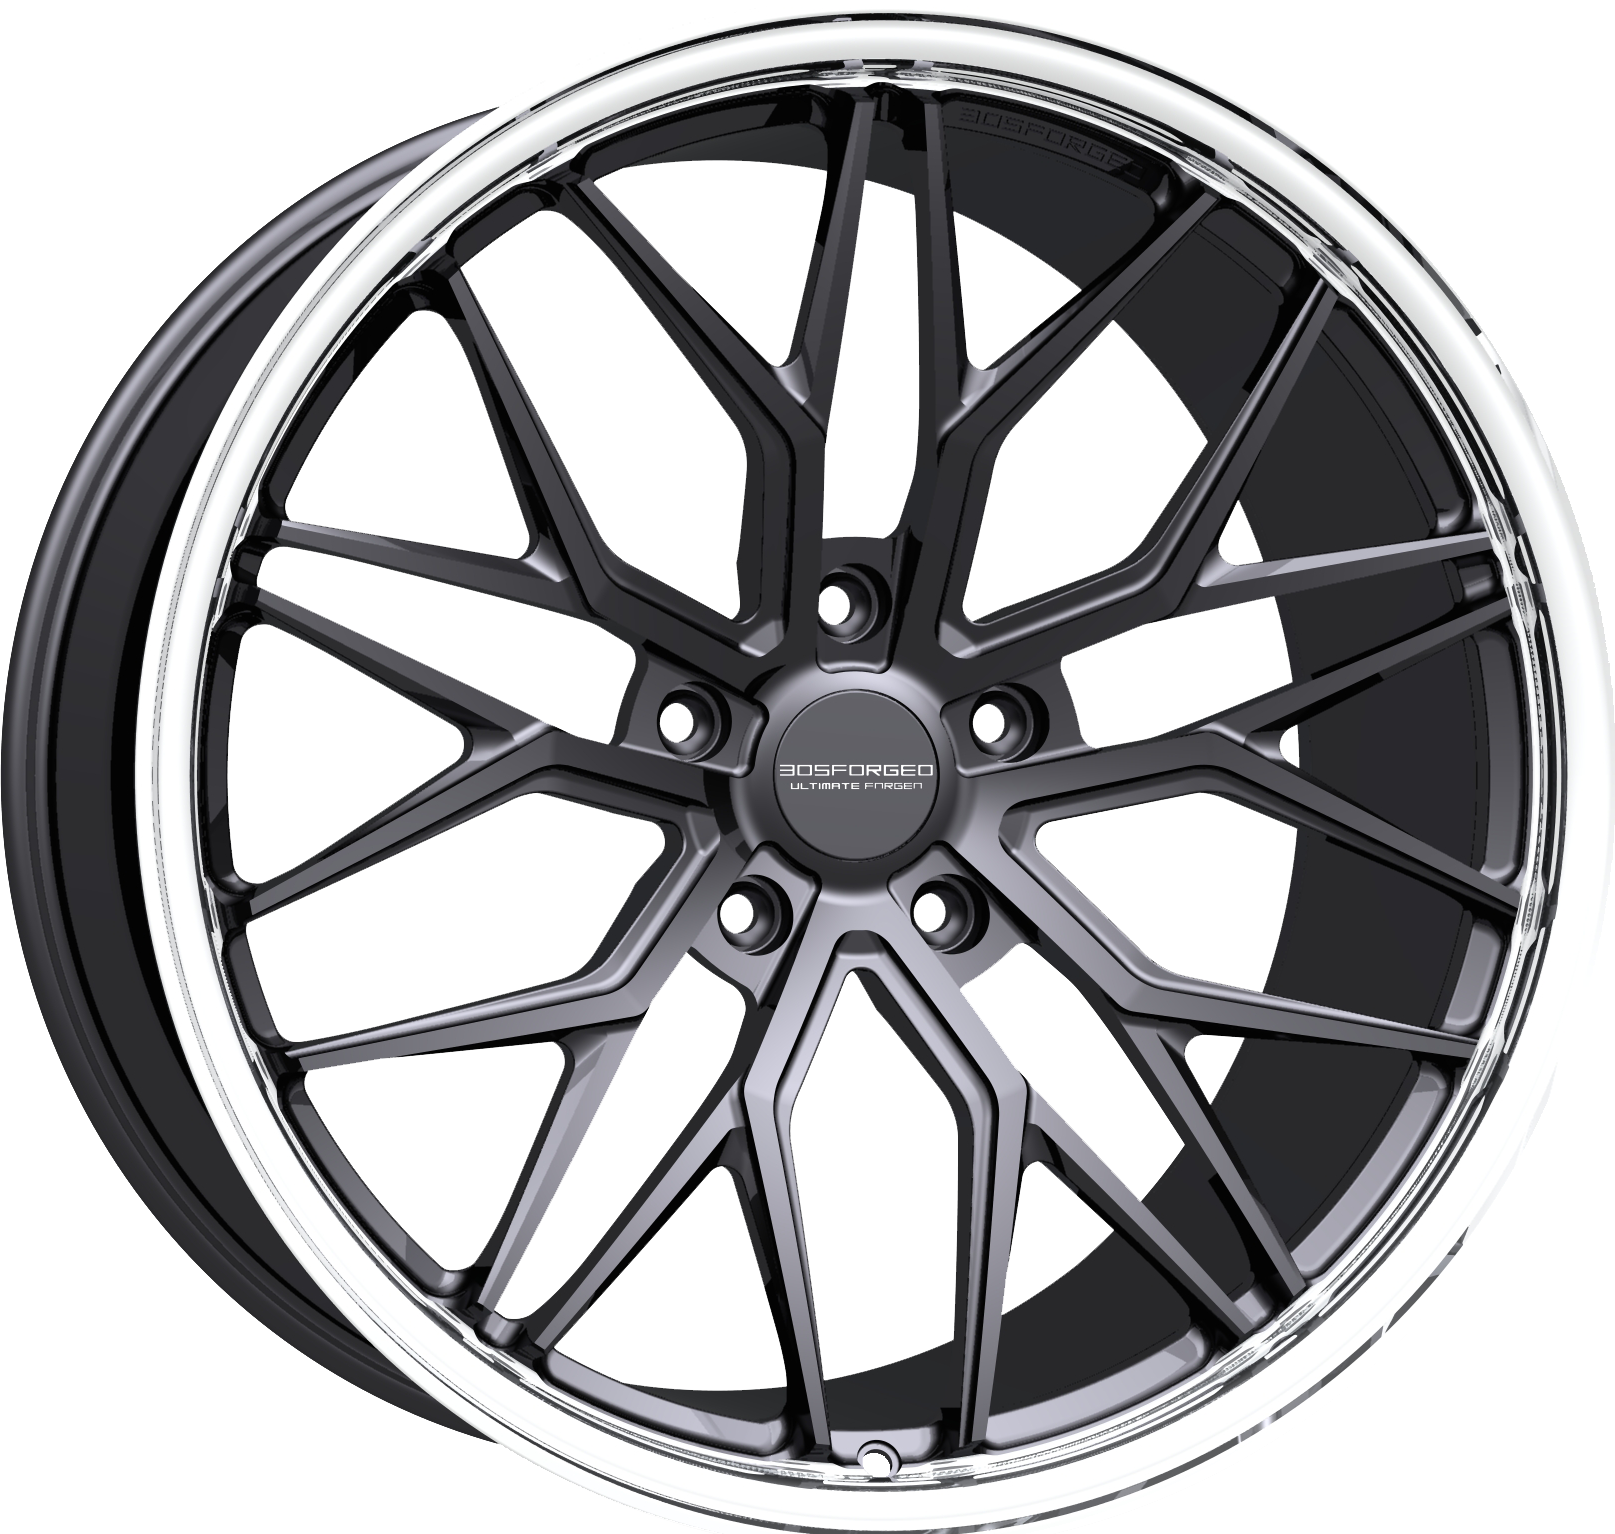 305 Forged UF103-L forged wheels